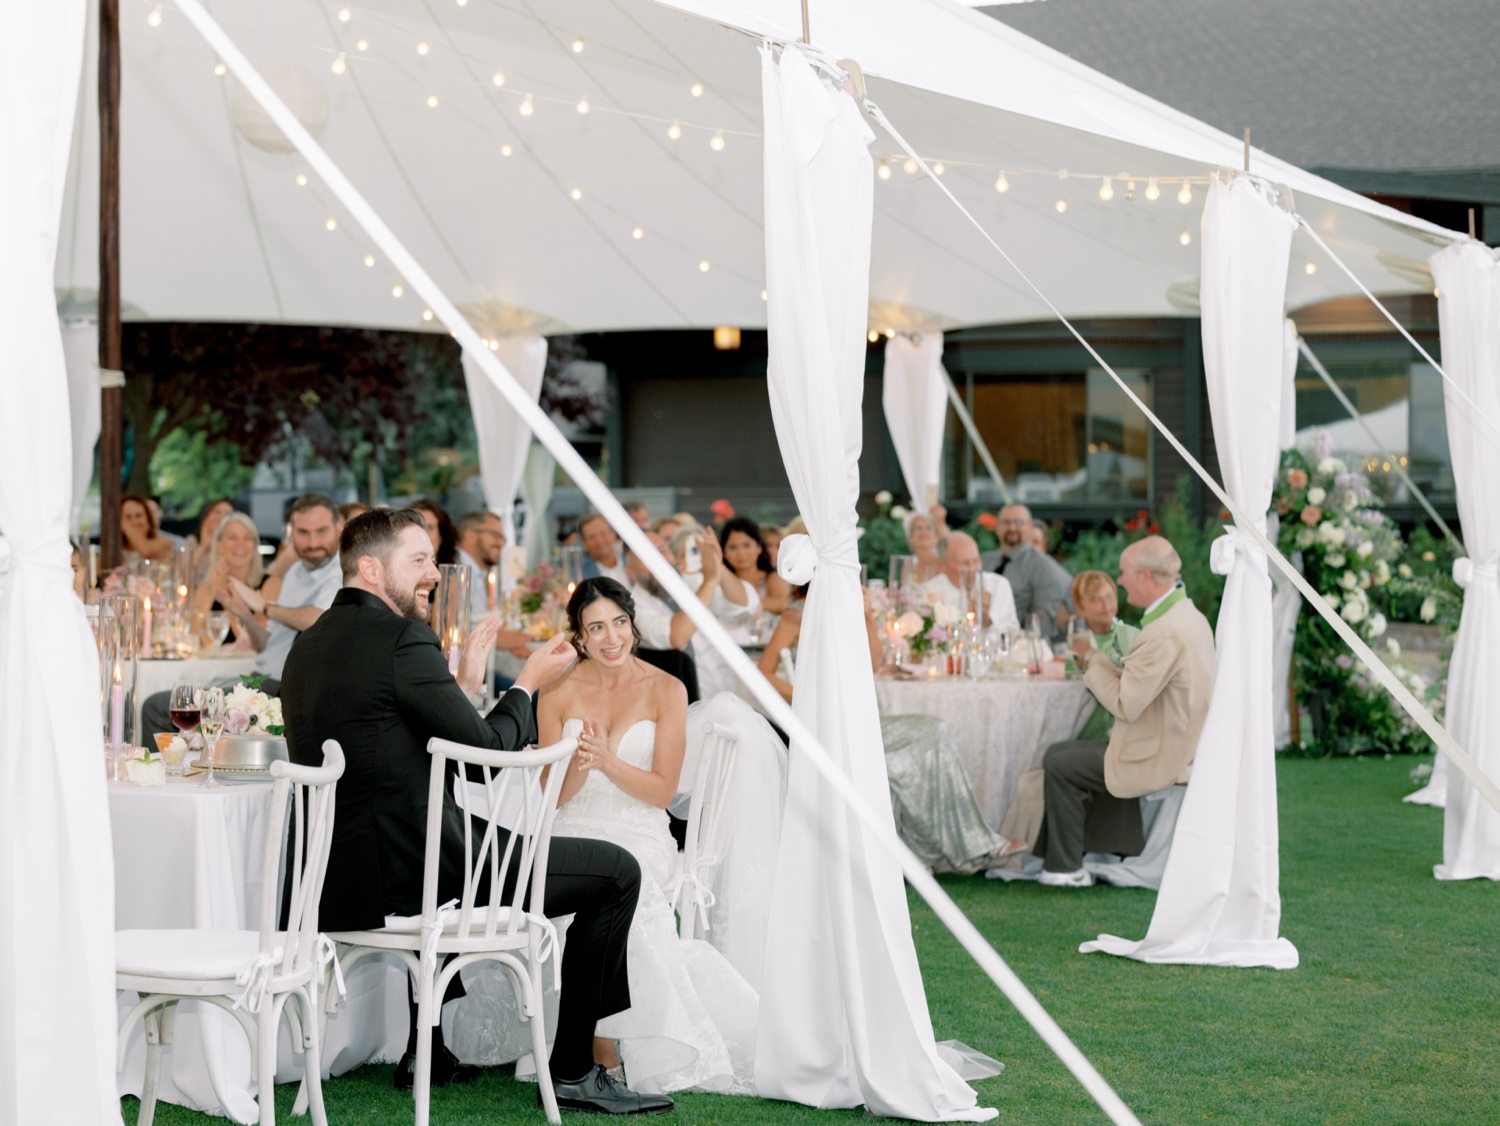 bride and groom clapping after speech during wedding reception at hayden lake country club